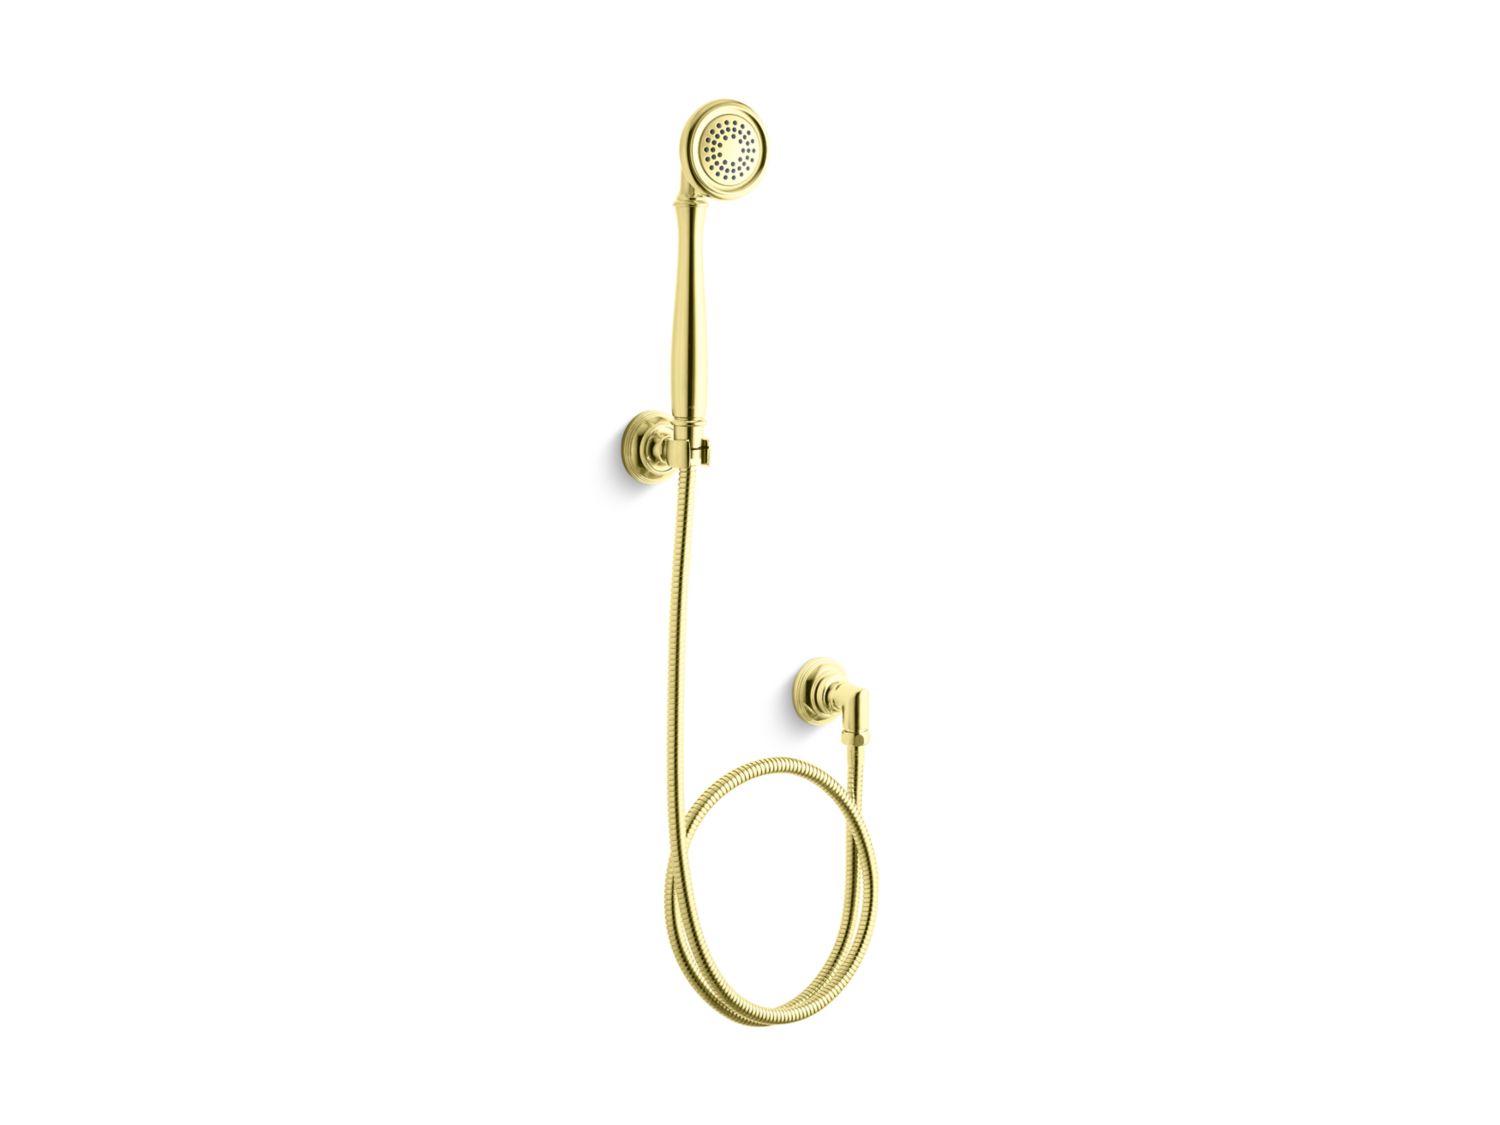 Bellis Single Function Handshower and Hose with 1.75 GPM